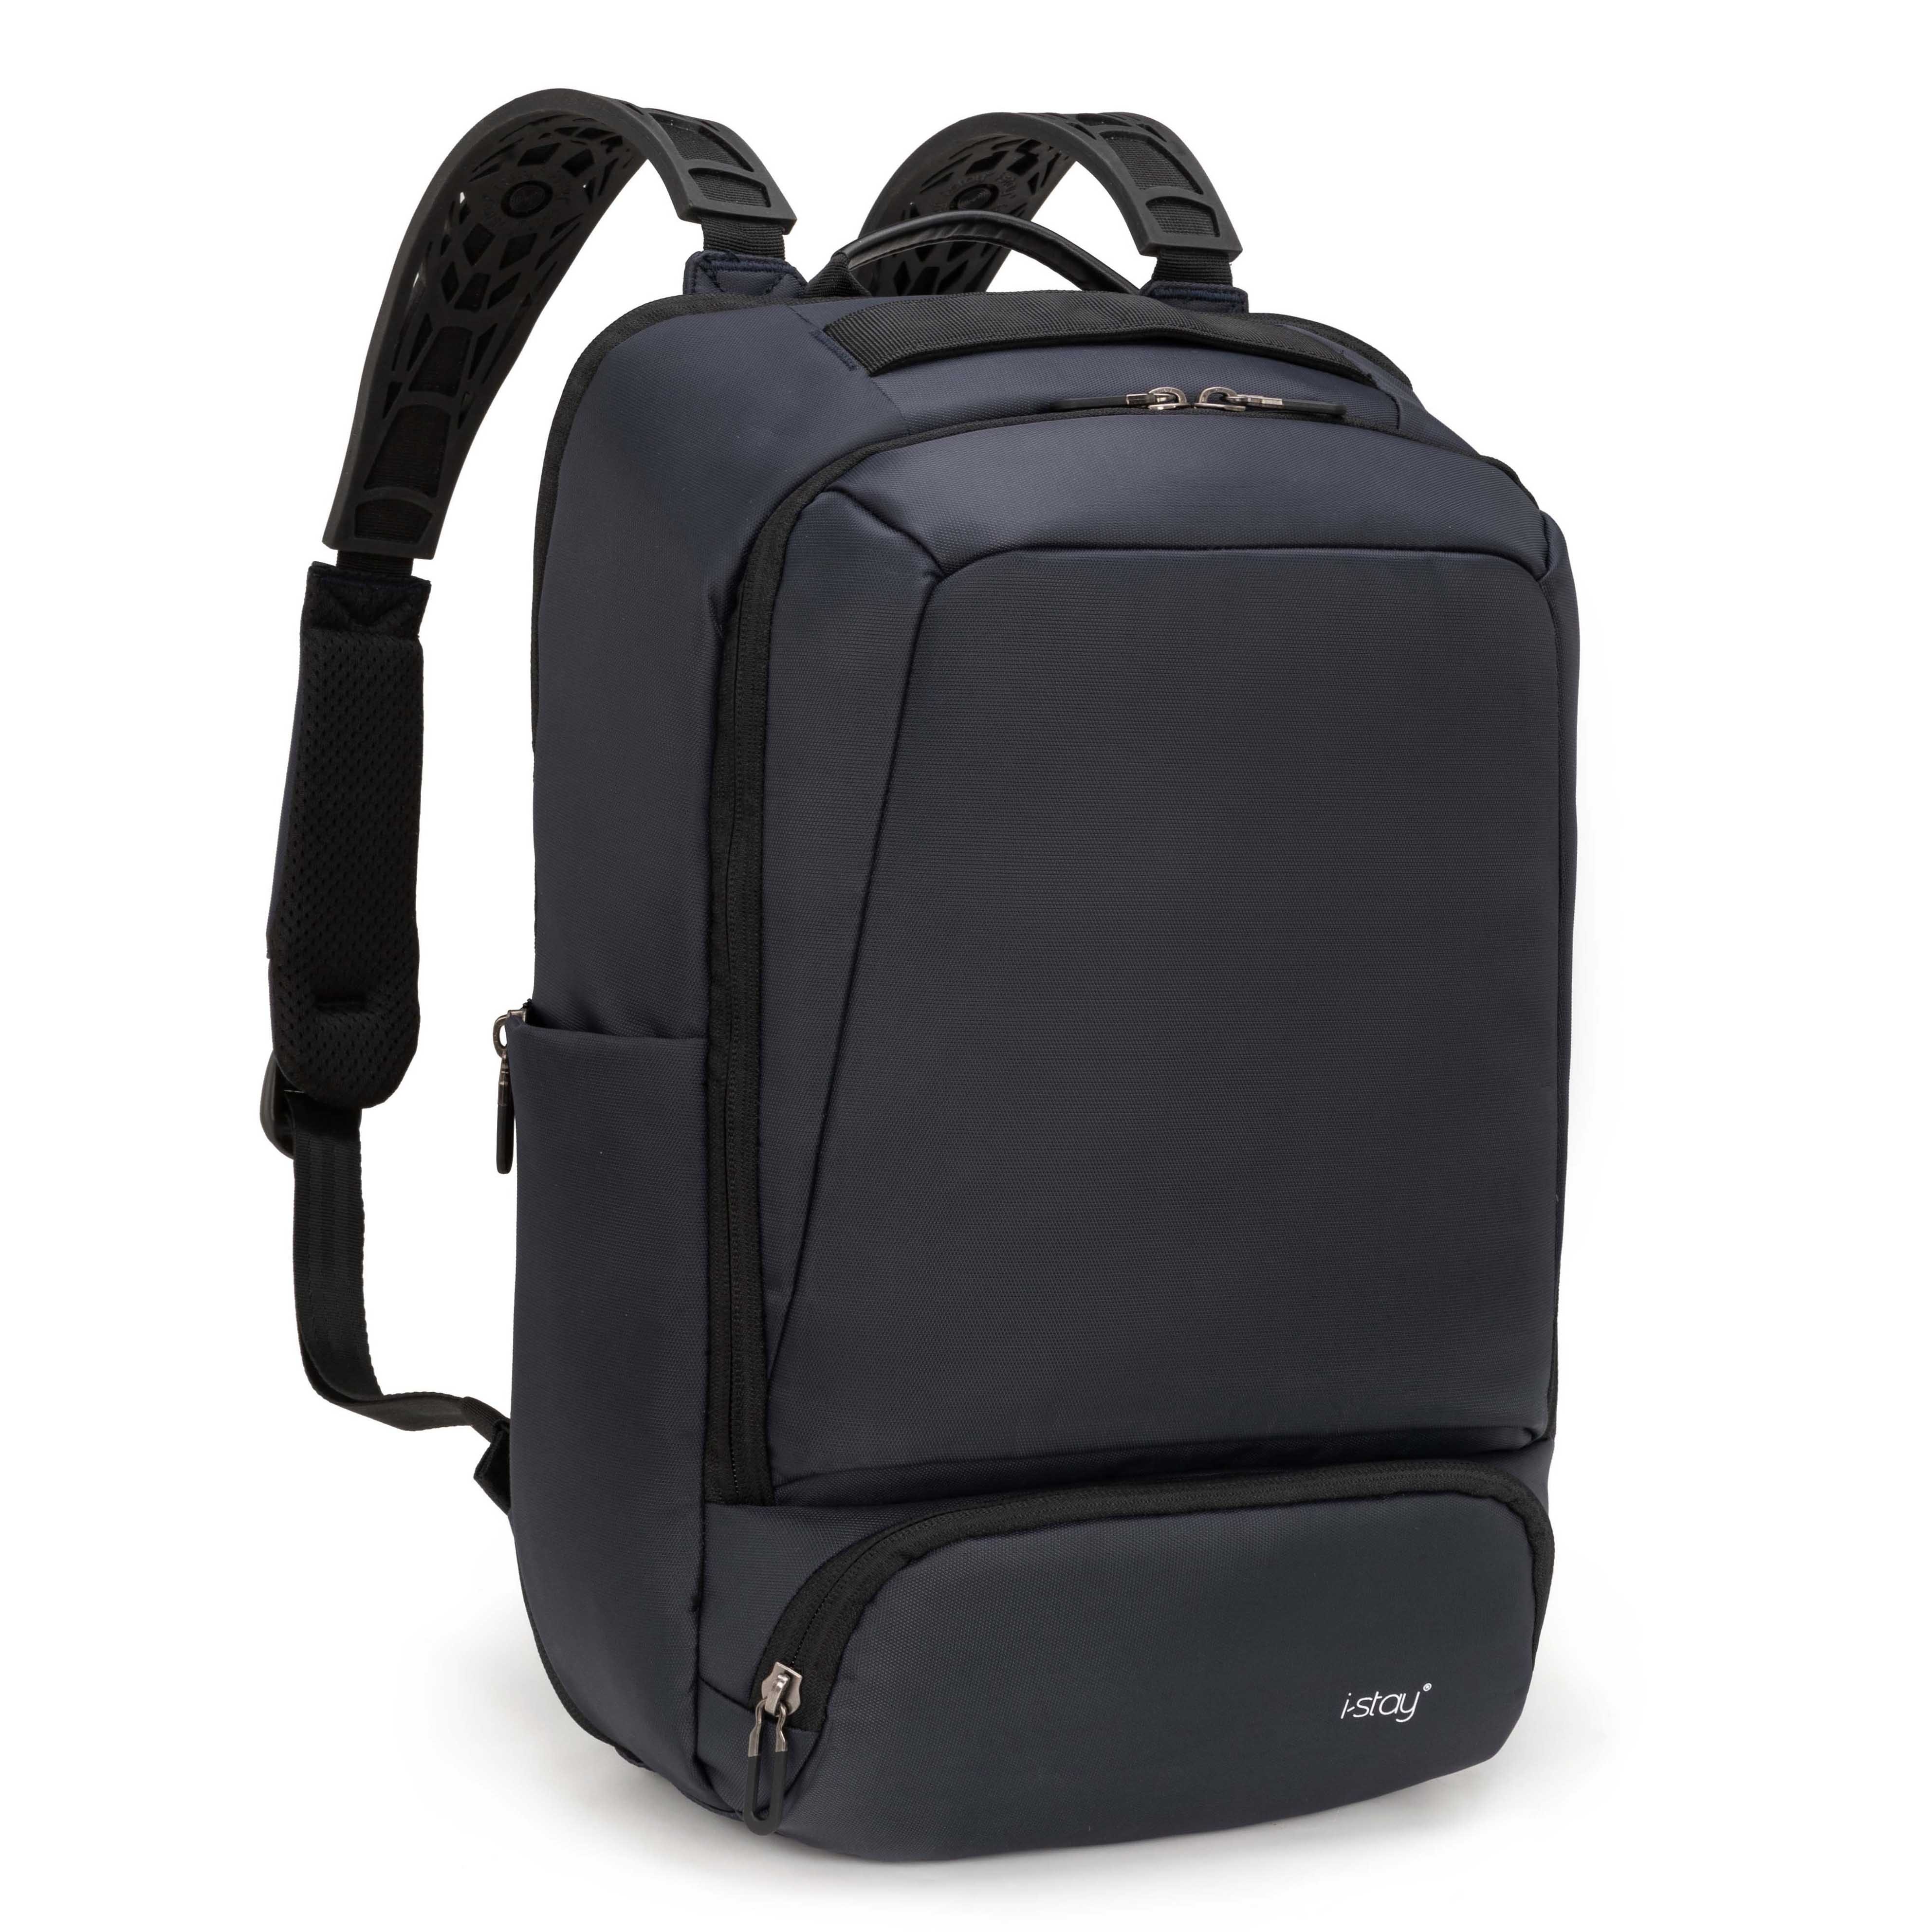 weekly Ridiculous Scorch i-stay 15.6” Anti-theft Laptop & Tablet Overnight Backpack With RFID Pocket  - Navy - Safeline Range - i-stay